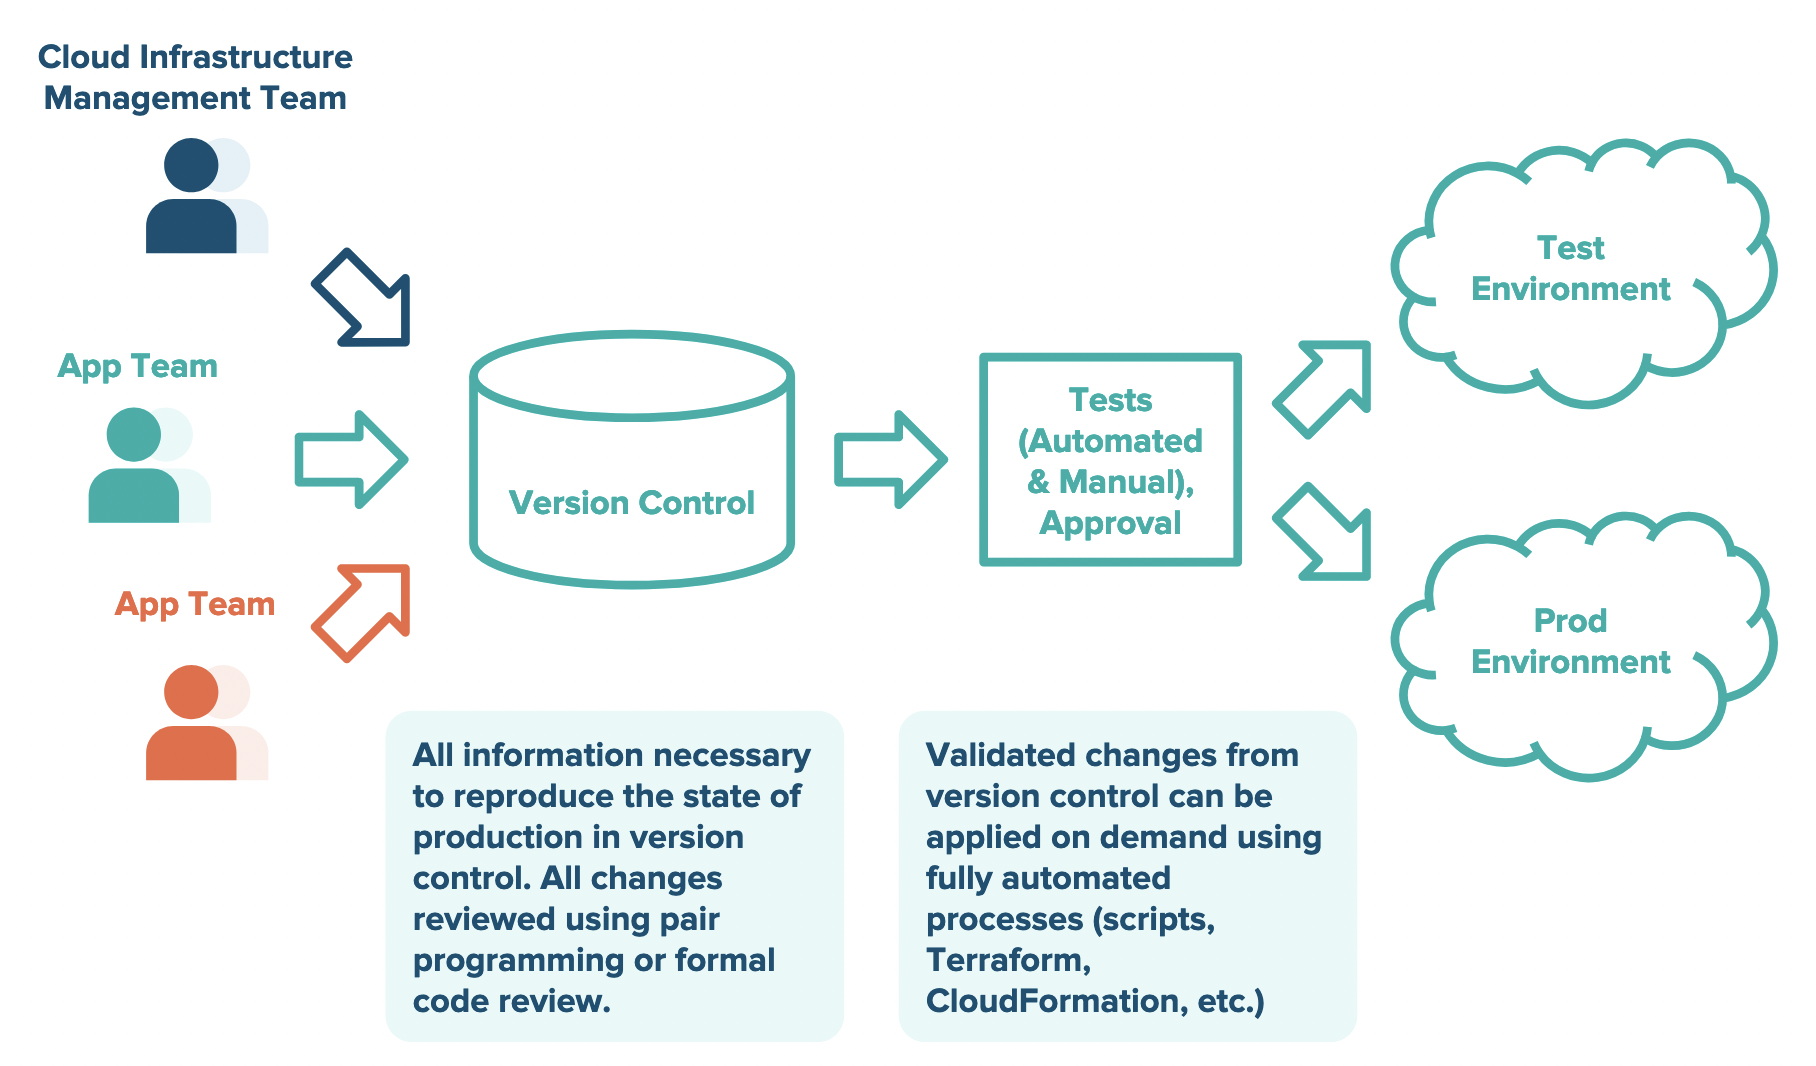 A diagram shows the cloud infrastructure management team, and two app teams connected to version control, which is connected to tests (automatic and manual) and approval, which is connected to the test environment and the production environment.